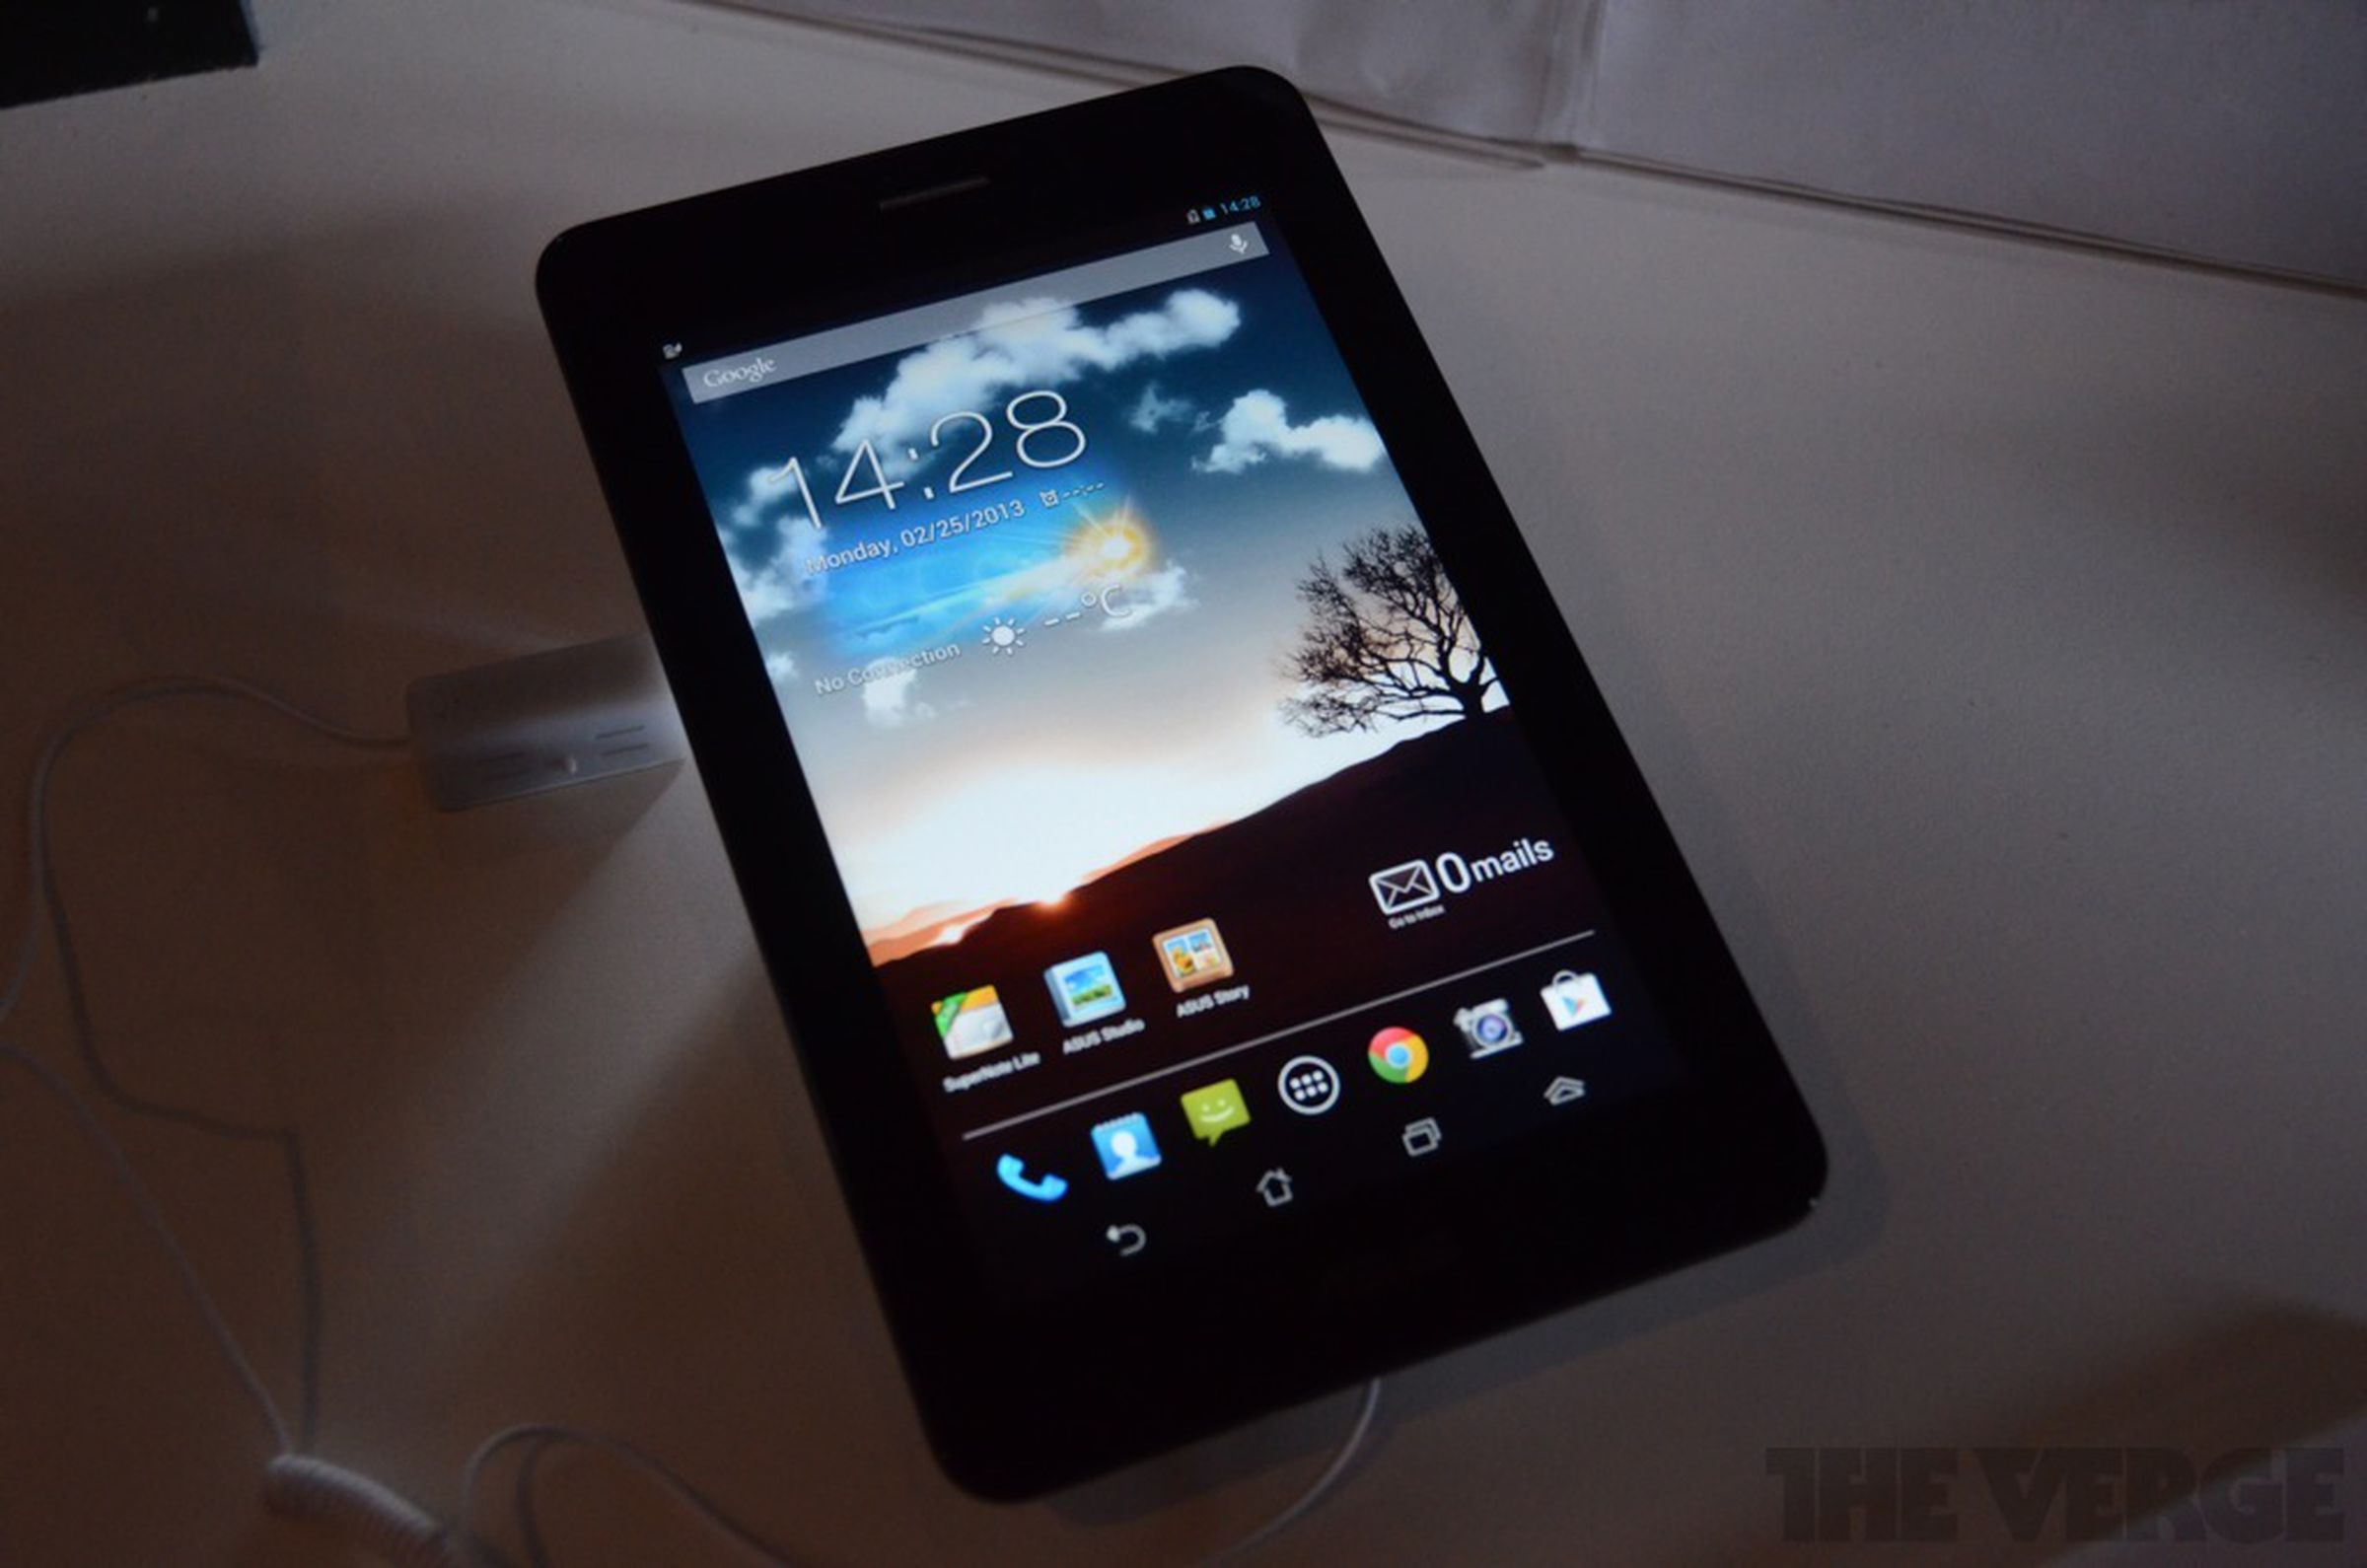 Asus Fonepad hands-on pictures